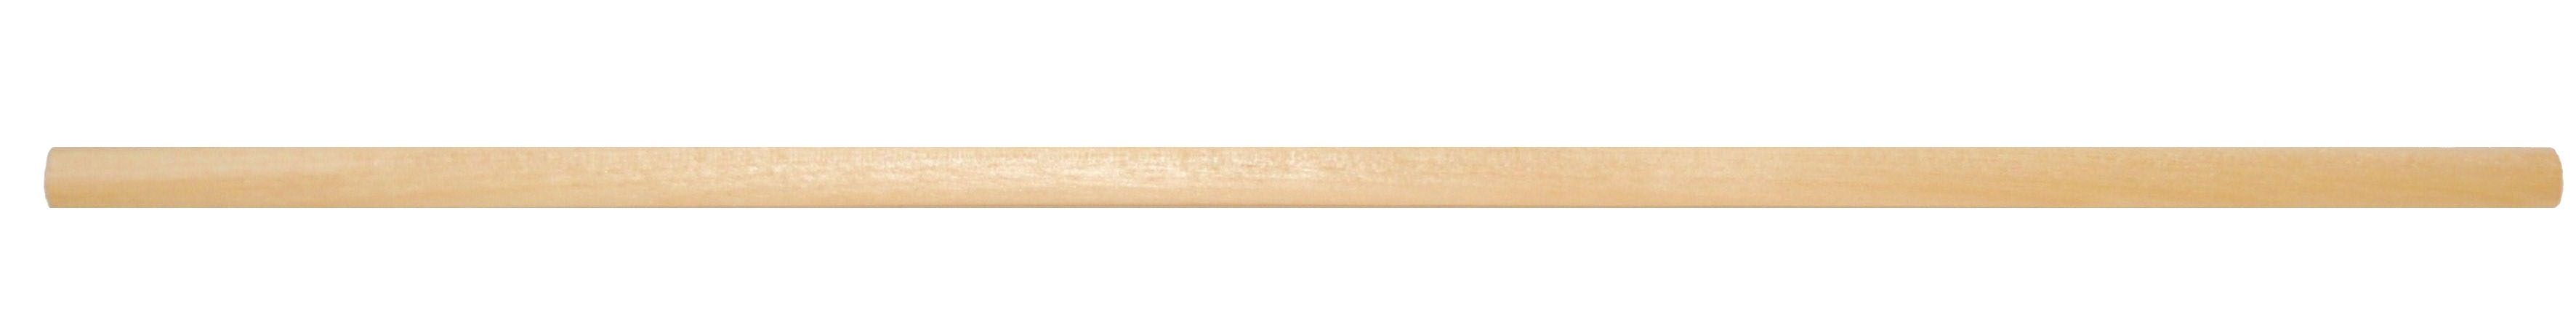 12" x 1/4 Craft Dowels- Pack of 100ct